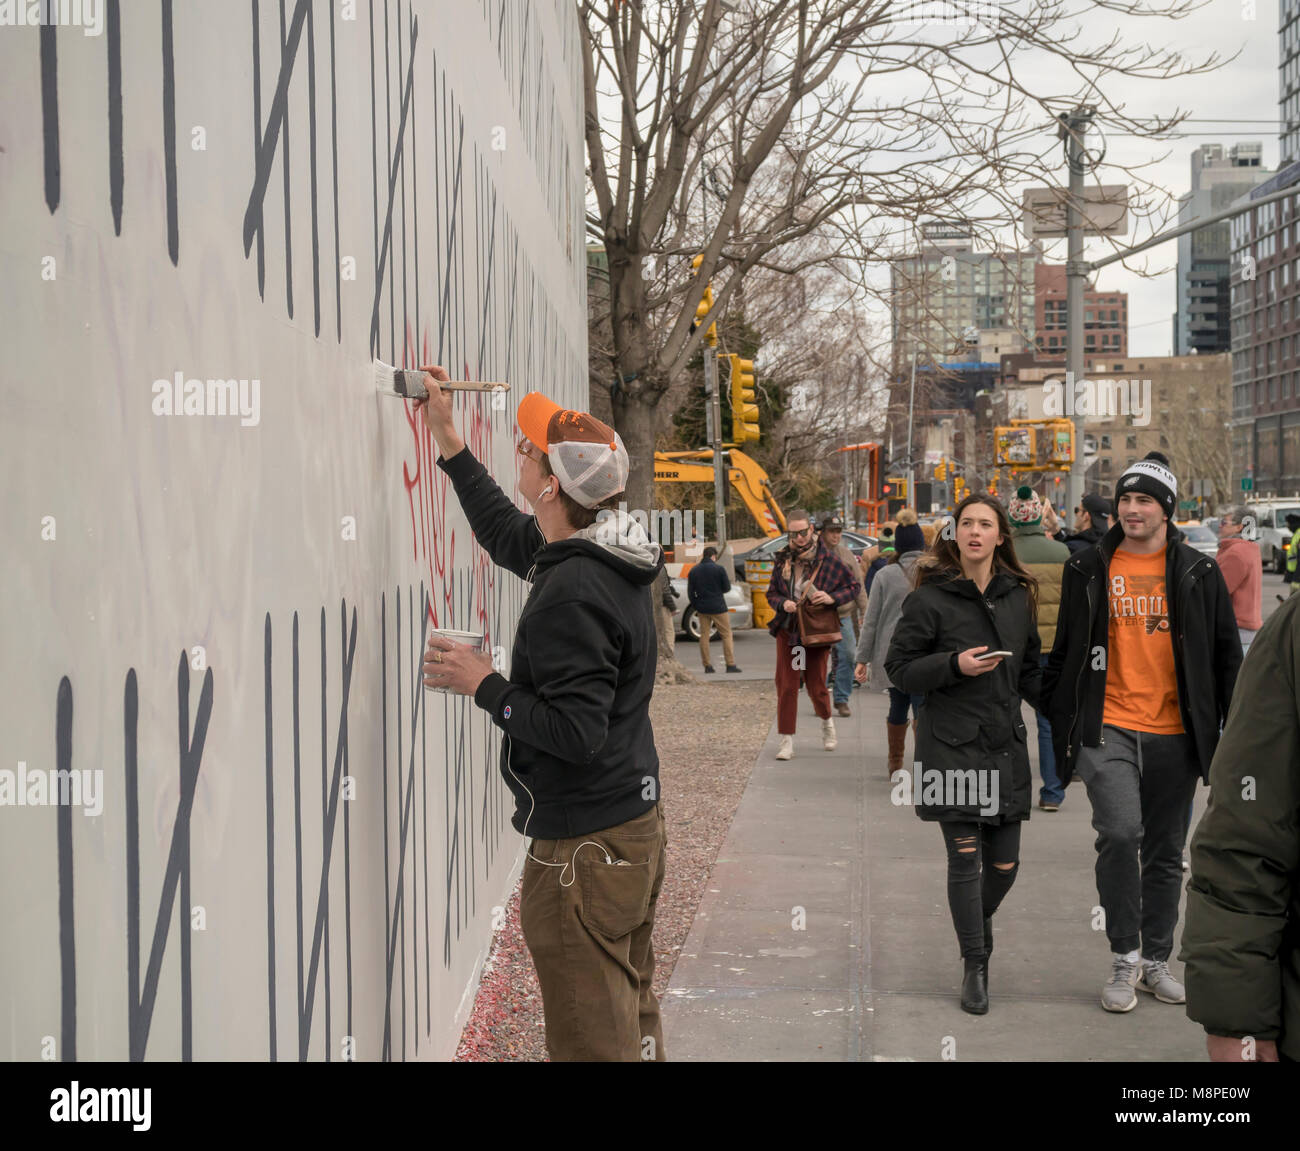 A worker repairs vandalism on the 'Bowery Wall on Houston Street in New York on Saturday, March 17, 2018 home to Banksy's collaboration with the street artist Borf. The work is a tribute to the jailed Turkish Kurdish artist Zehra Dogan who was arrested for painting a work featuring a Kurdish town in ruins after a conflict between the army and Kurdish rebels.  Banksy's work previously appeared in New York on October 2013 when he created a work a day during his one month 'residency'. (Â© Richard B. Levine) Stock Photo